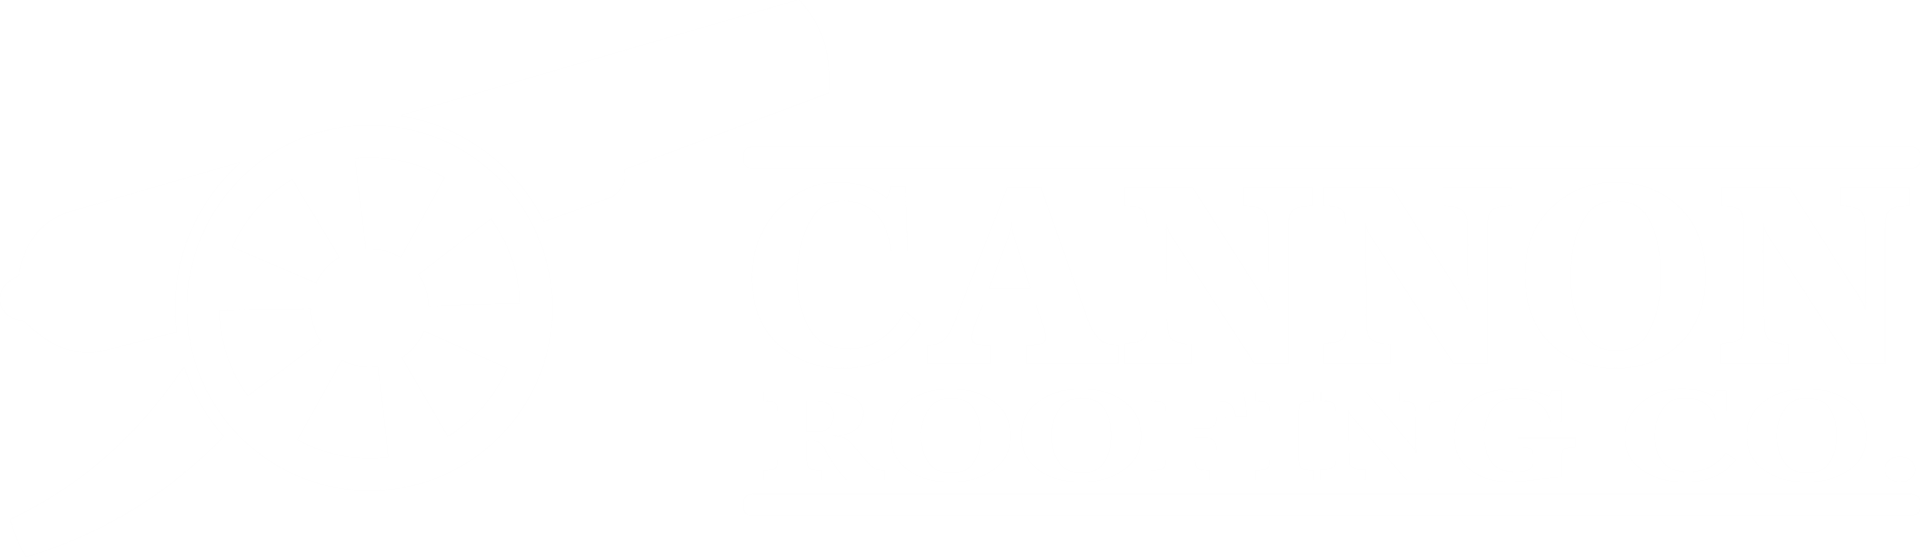 cannon roofing logo